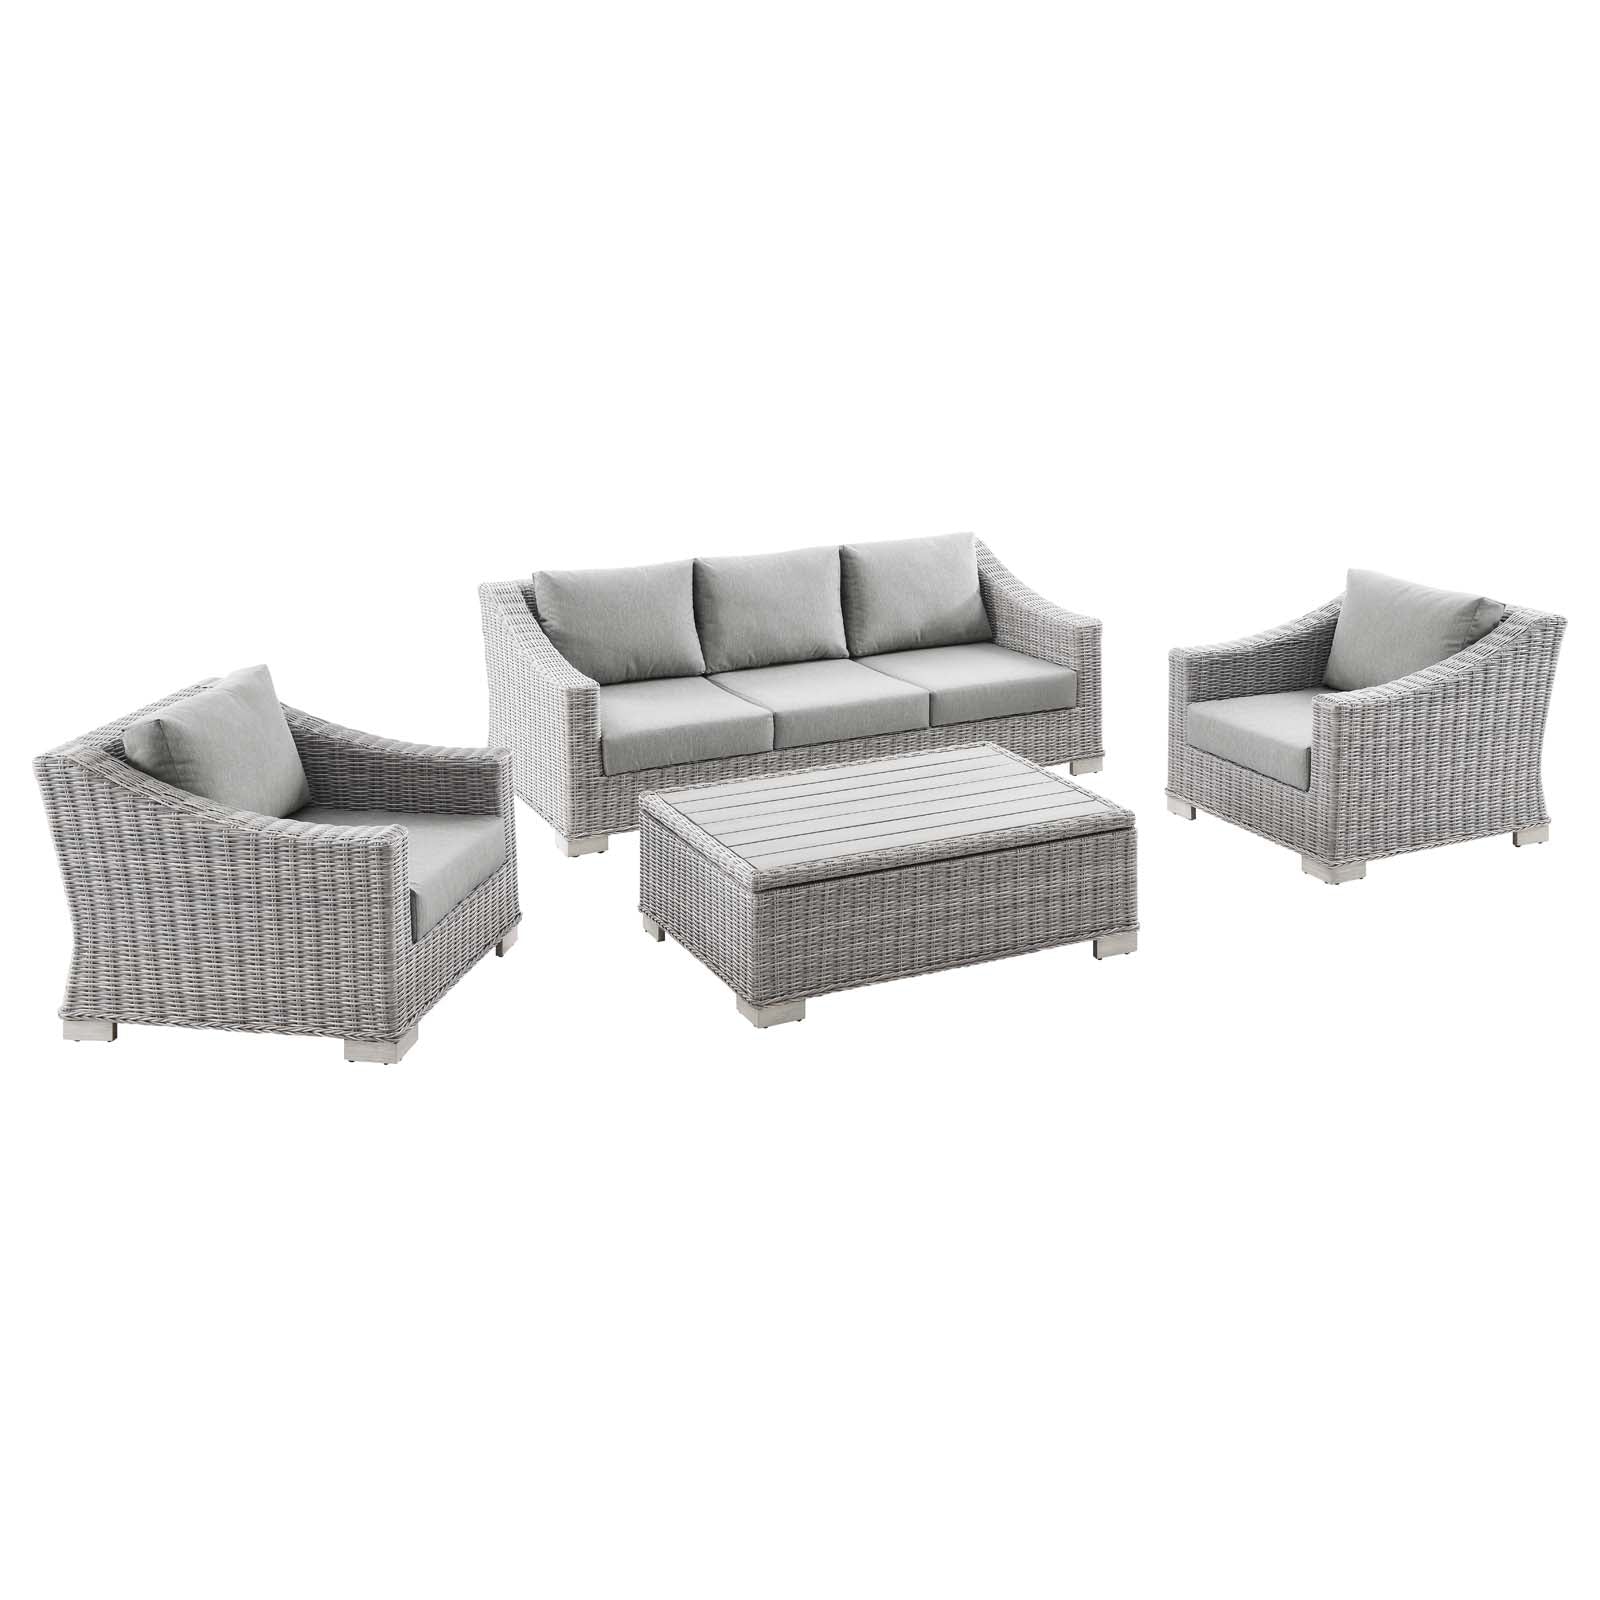 Modway Outdoor Conversation Sets - Conway 4 Piece Outdoor Patio Wicker Rattan Furniture Set Light Gray-EEI-5095-GRY